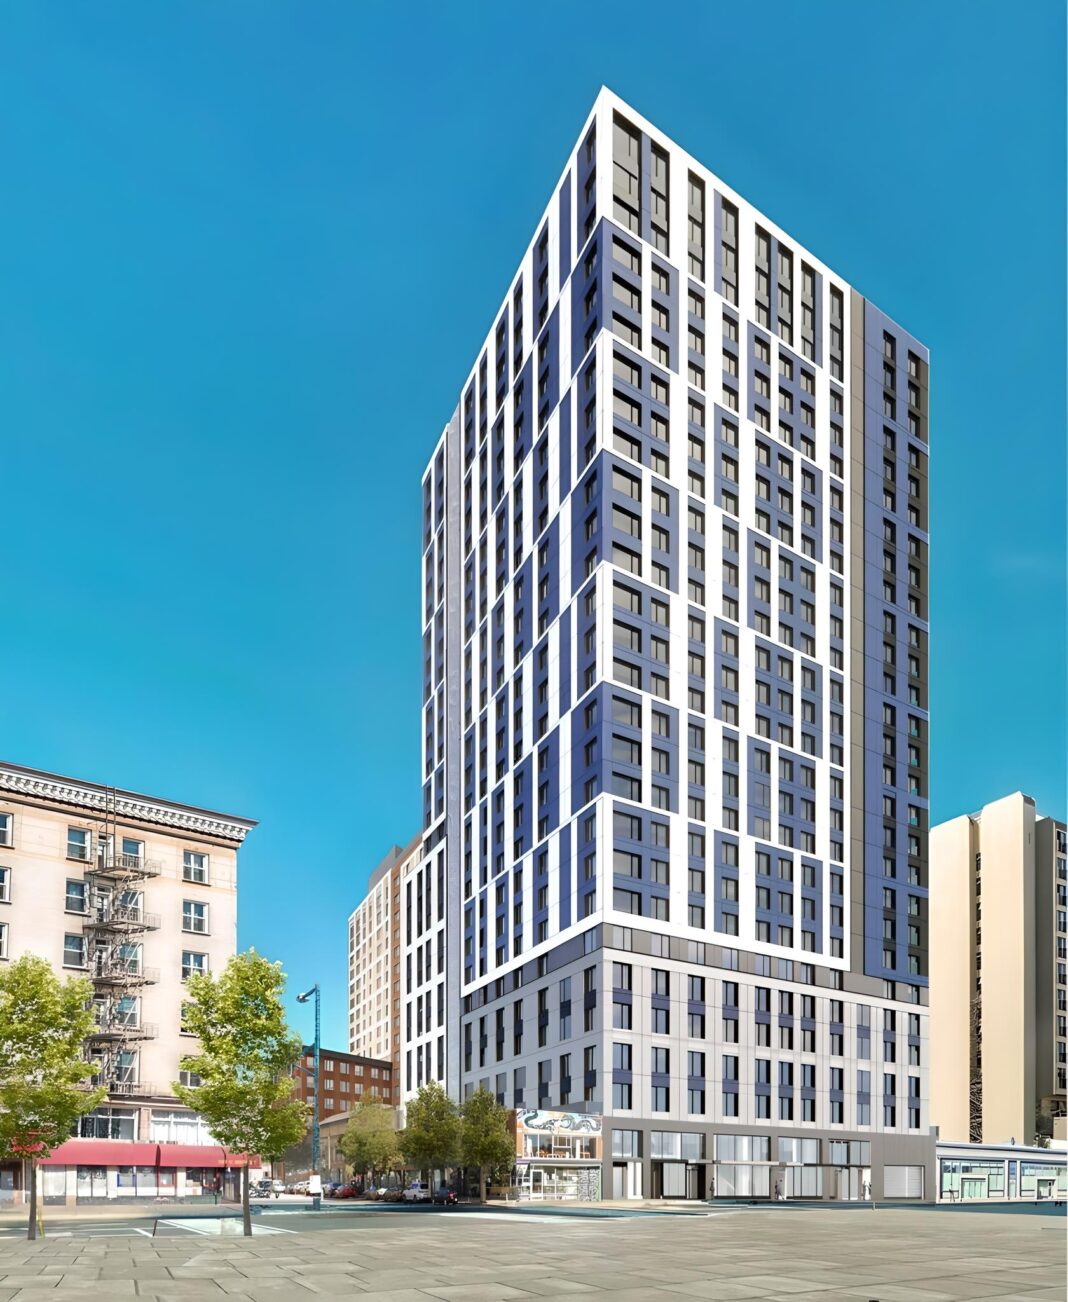 oWow's new development, at 1523 Harrison Street, will tower downtown Oakland, and will become California's largest mass timber building. (Photo Credit: Renders provided by oWow)